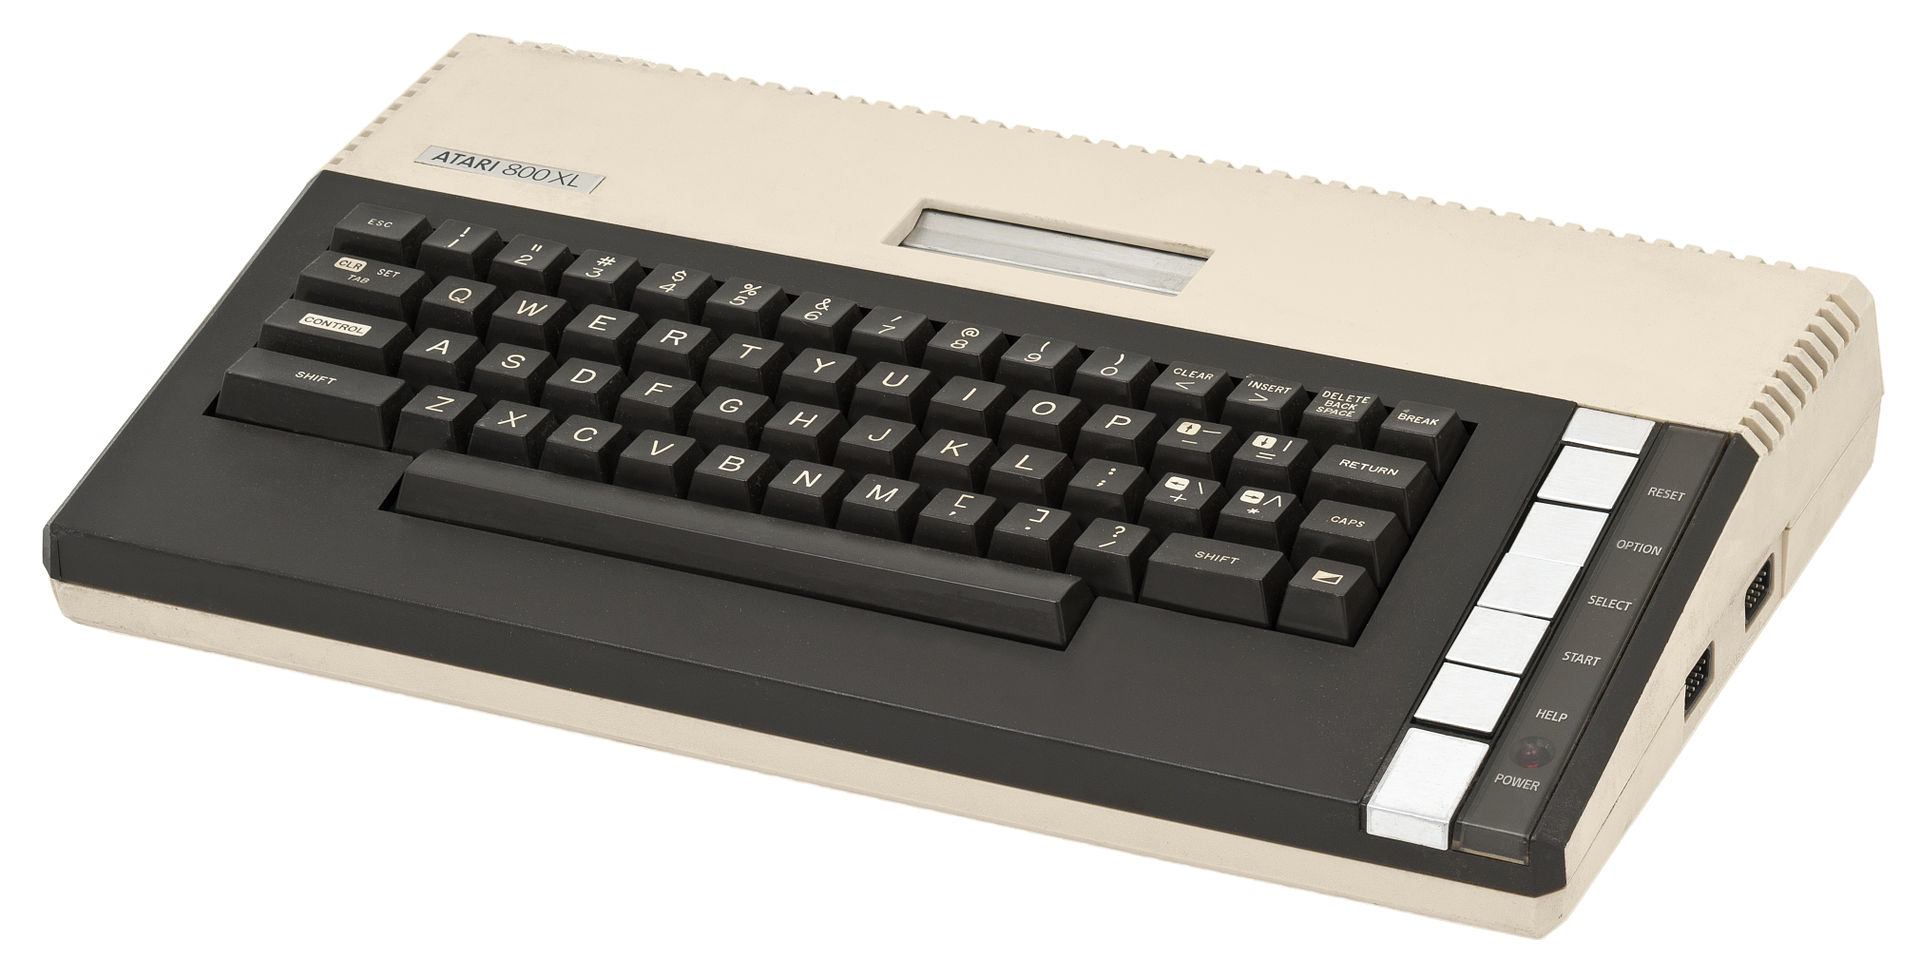 The Atari 800 is where it all began for Eckhart.